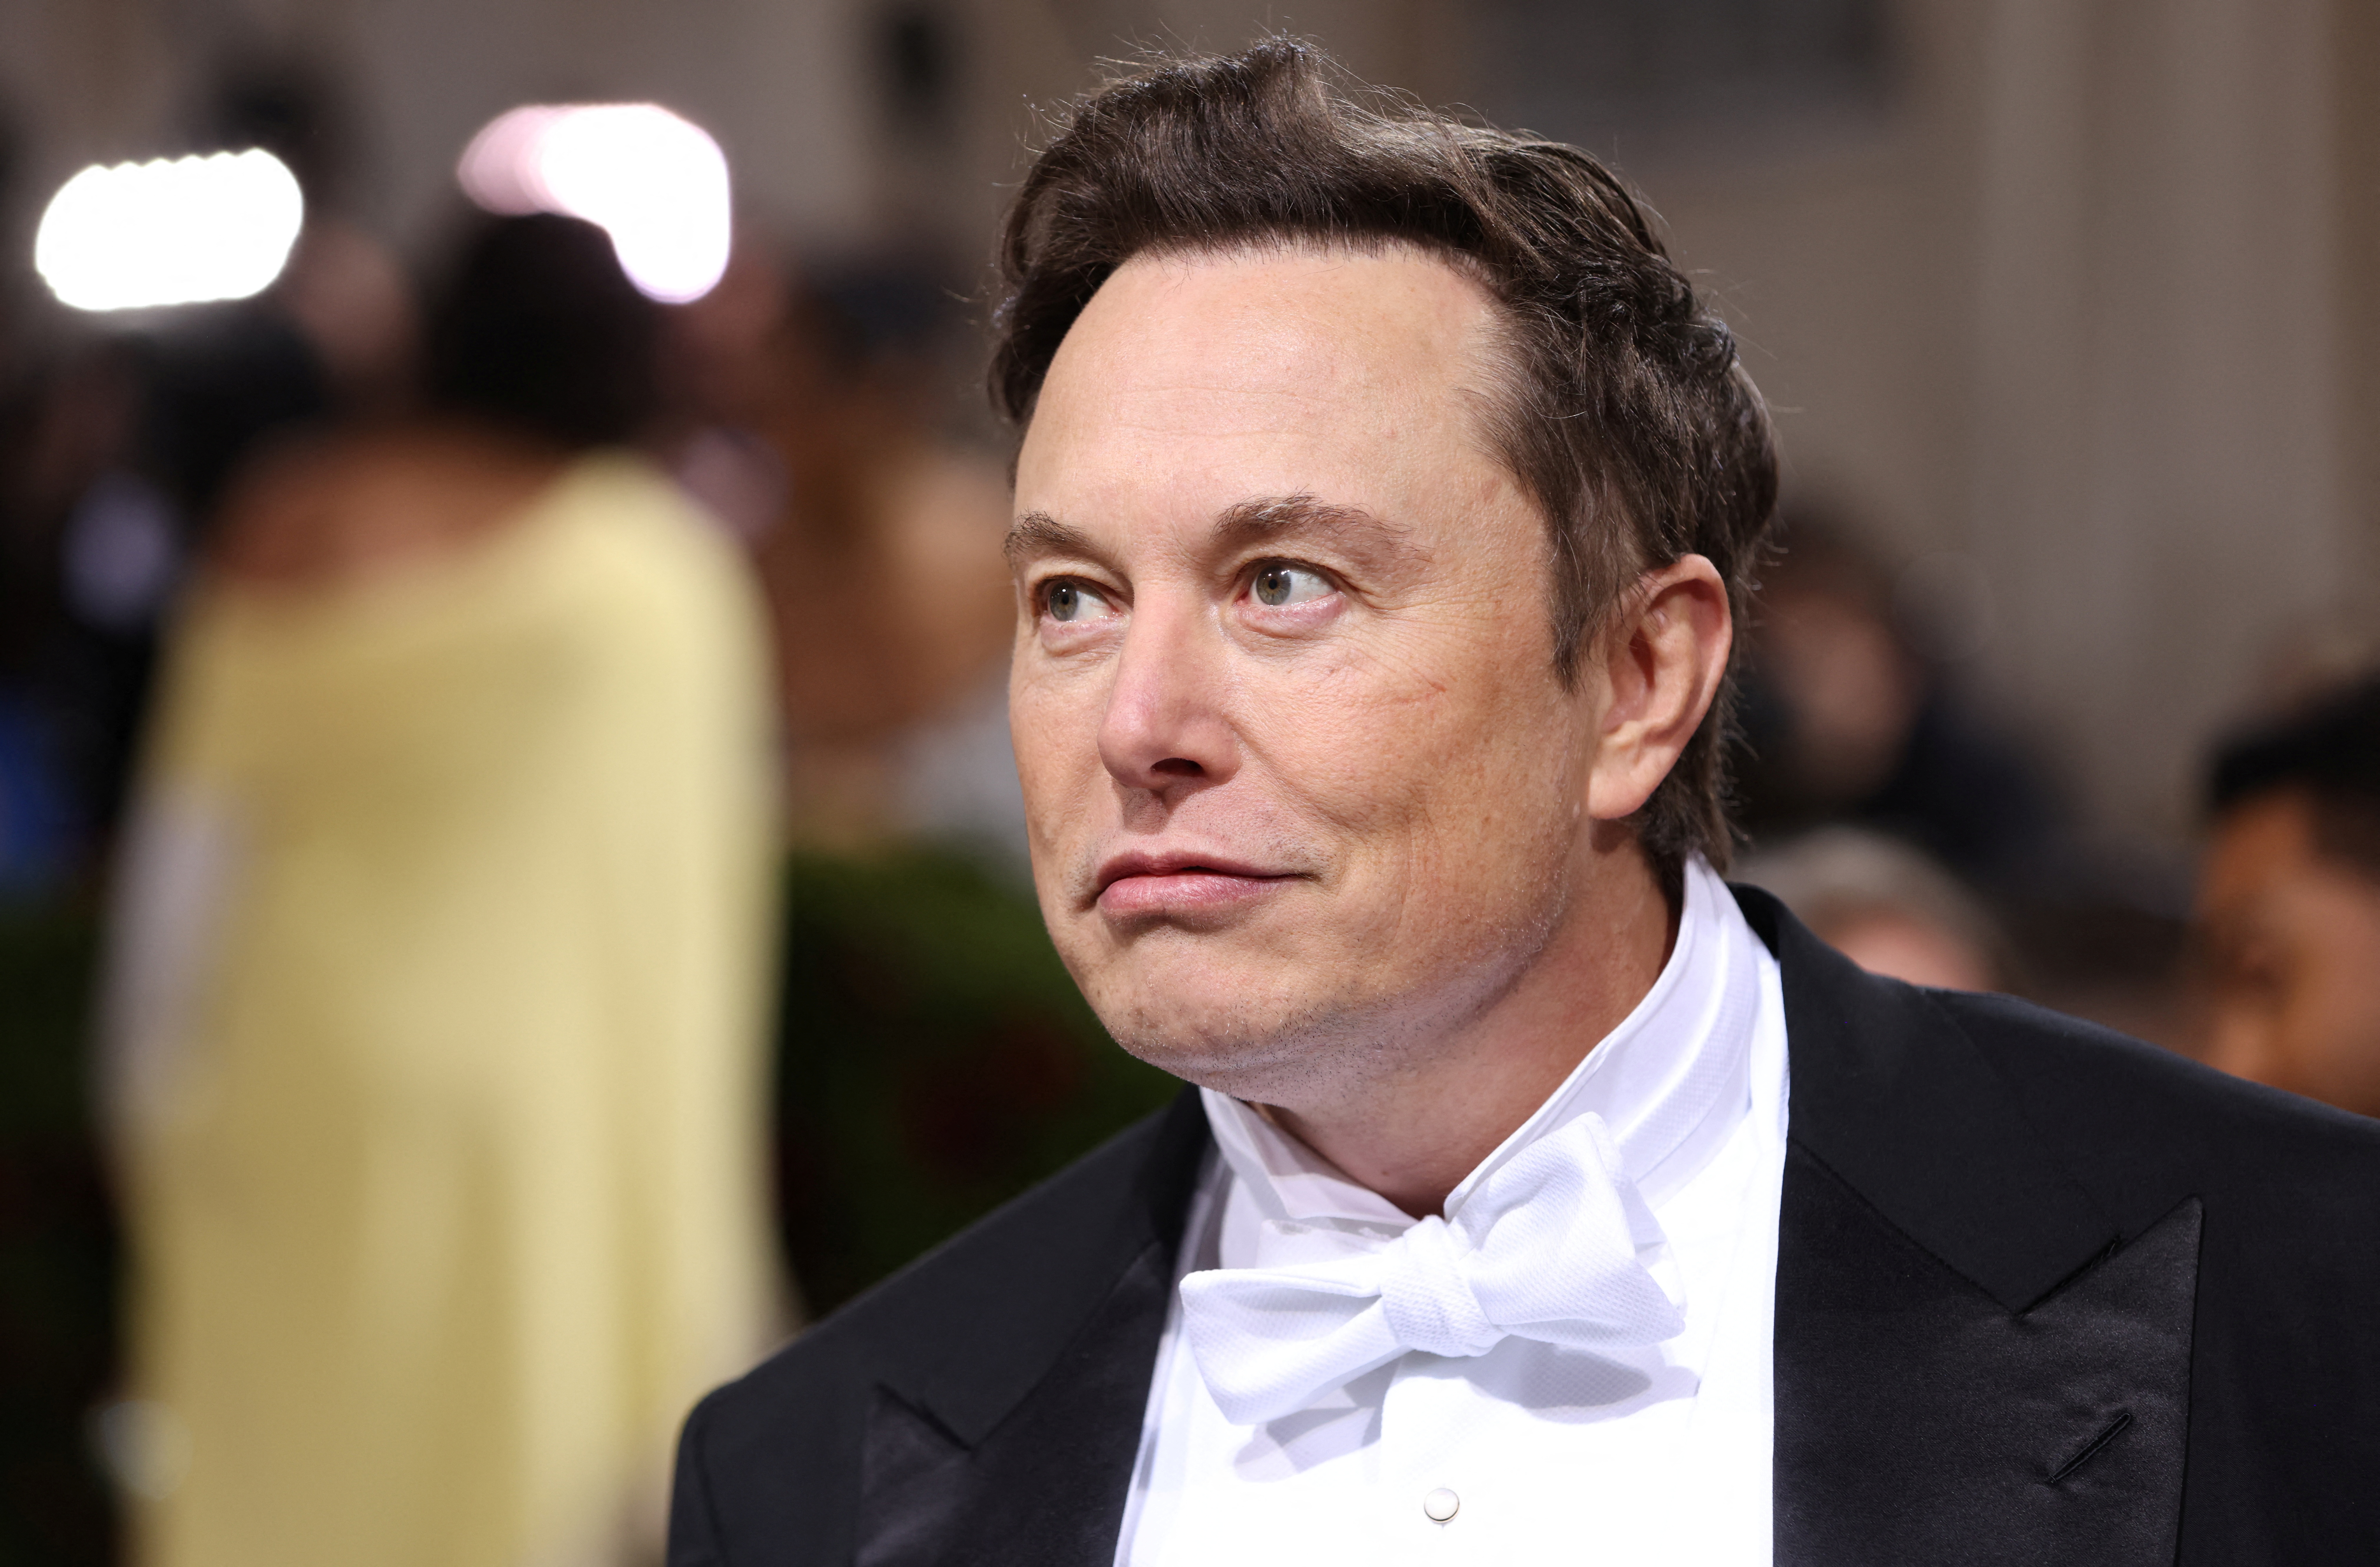 In anticipation of the US downturn, Elon Musk describes cuts in Tesla employees